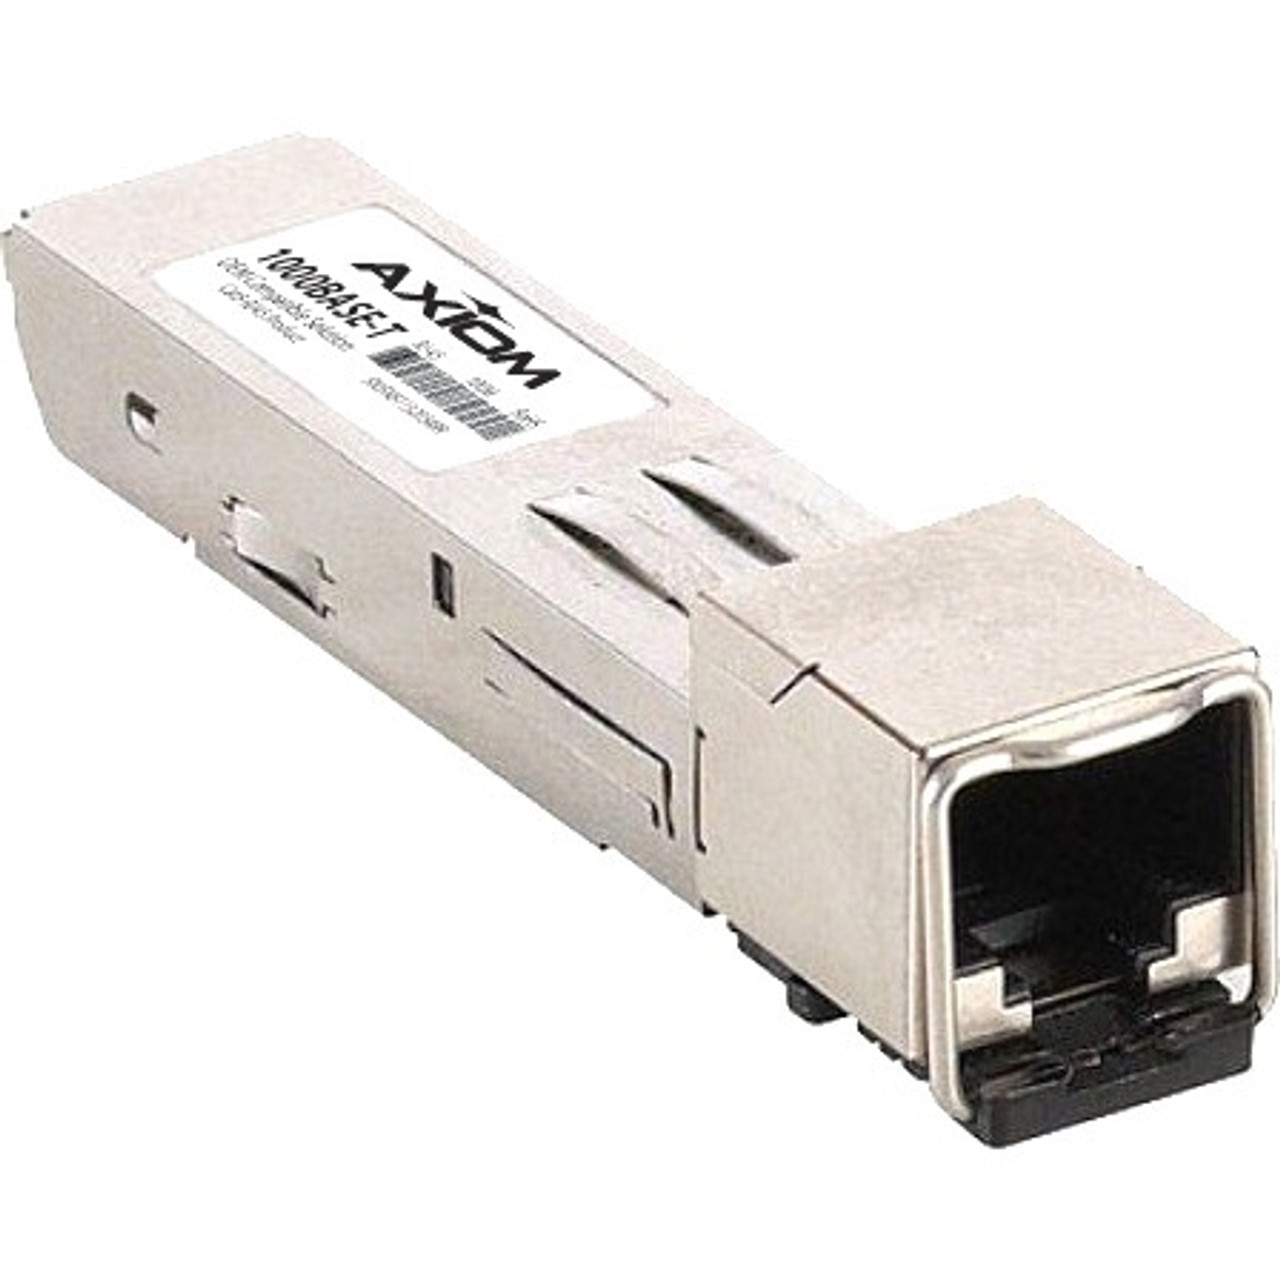 01-SSC-9791-AX Axiom 1Gbps 1000Base-T Copper 100m RJ-45 Connector SFP Transceiver Module for SonicWall Compatible